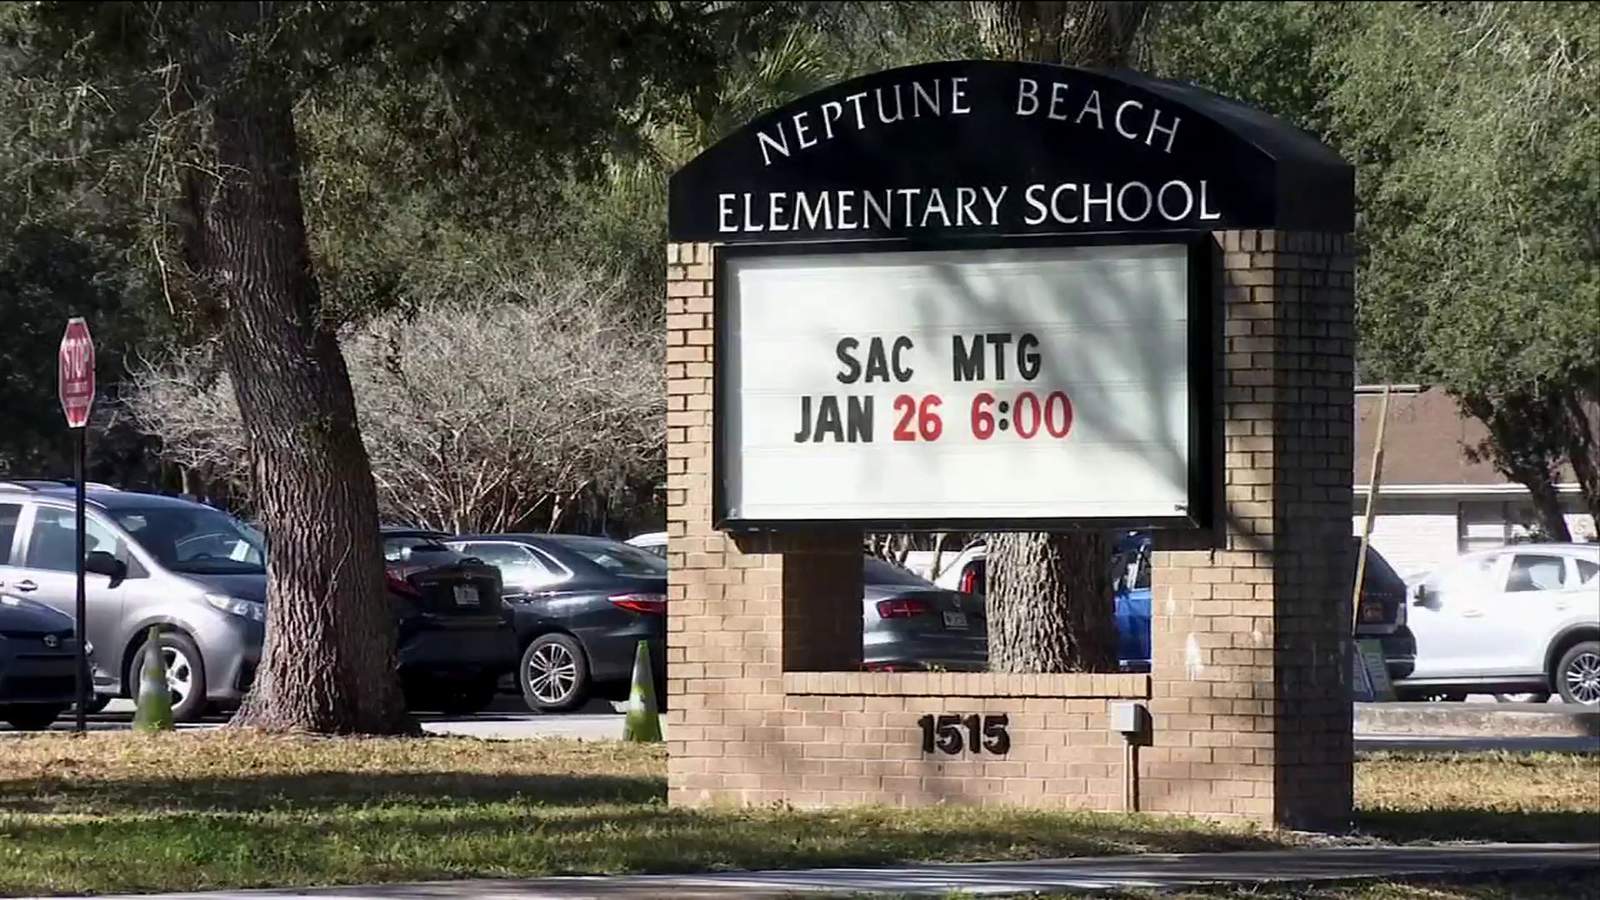 Neptune Beach Elementary teacher’s assistant dies due to COVID-19 complications, board member says